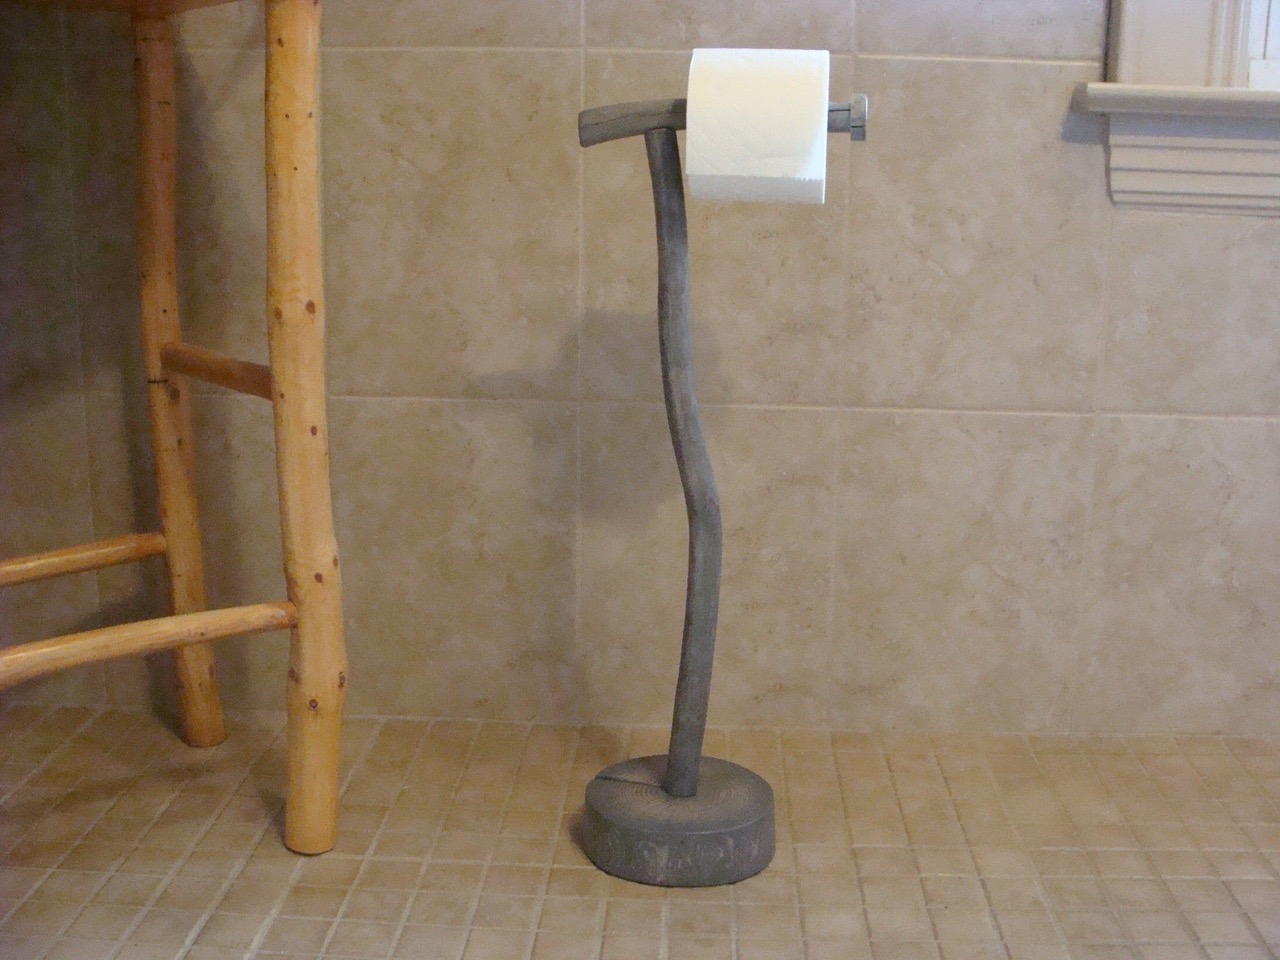 How To Use Pedestal Toilet Paper Holder